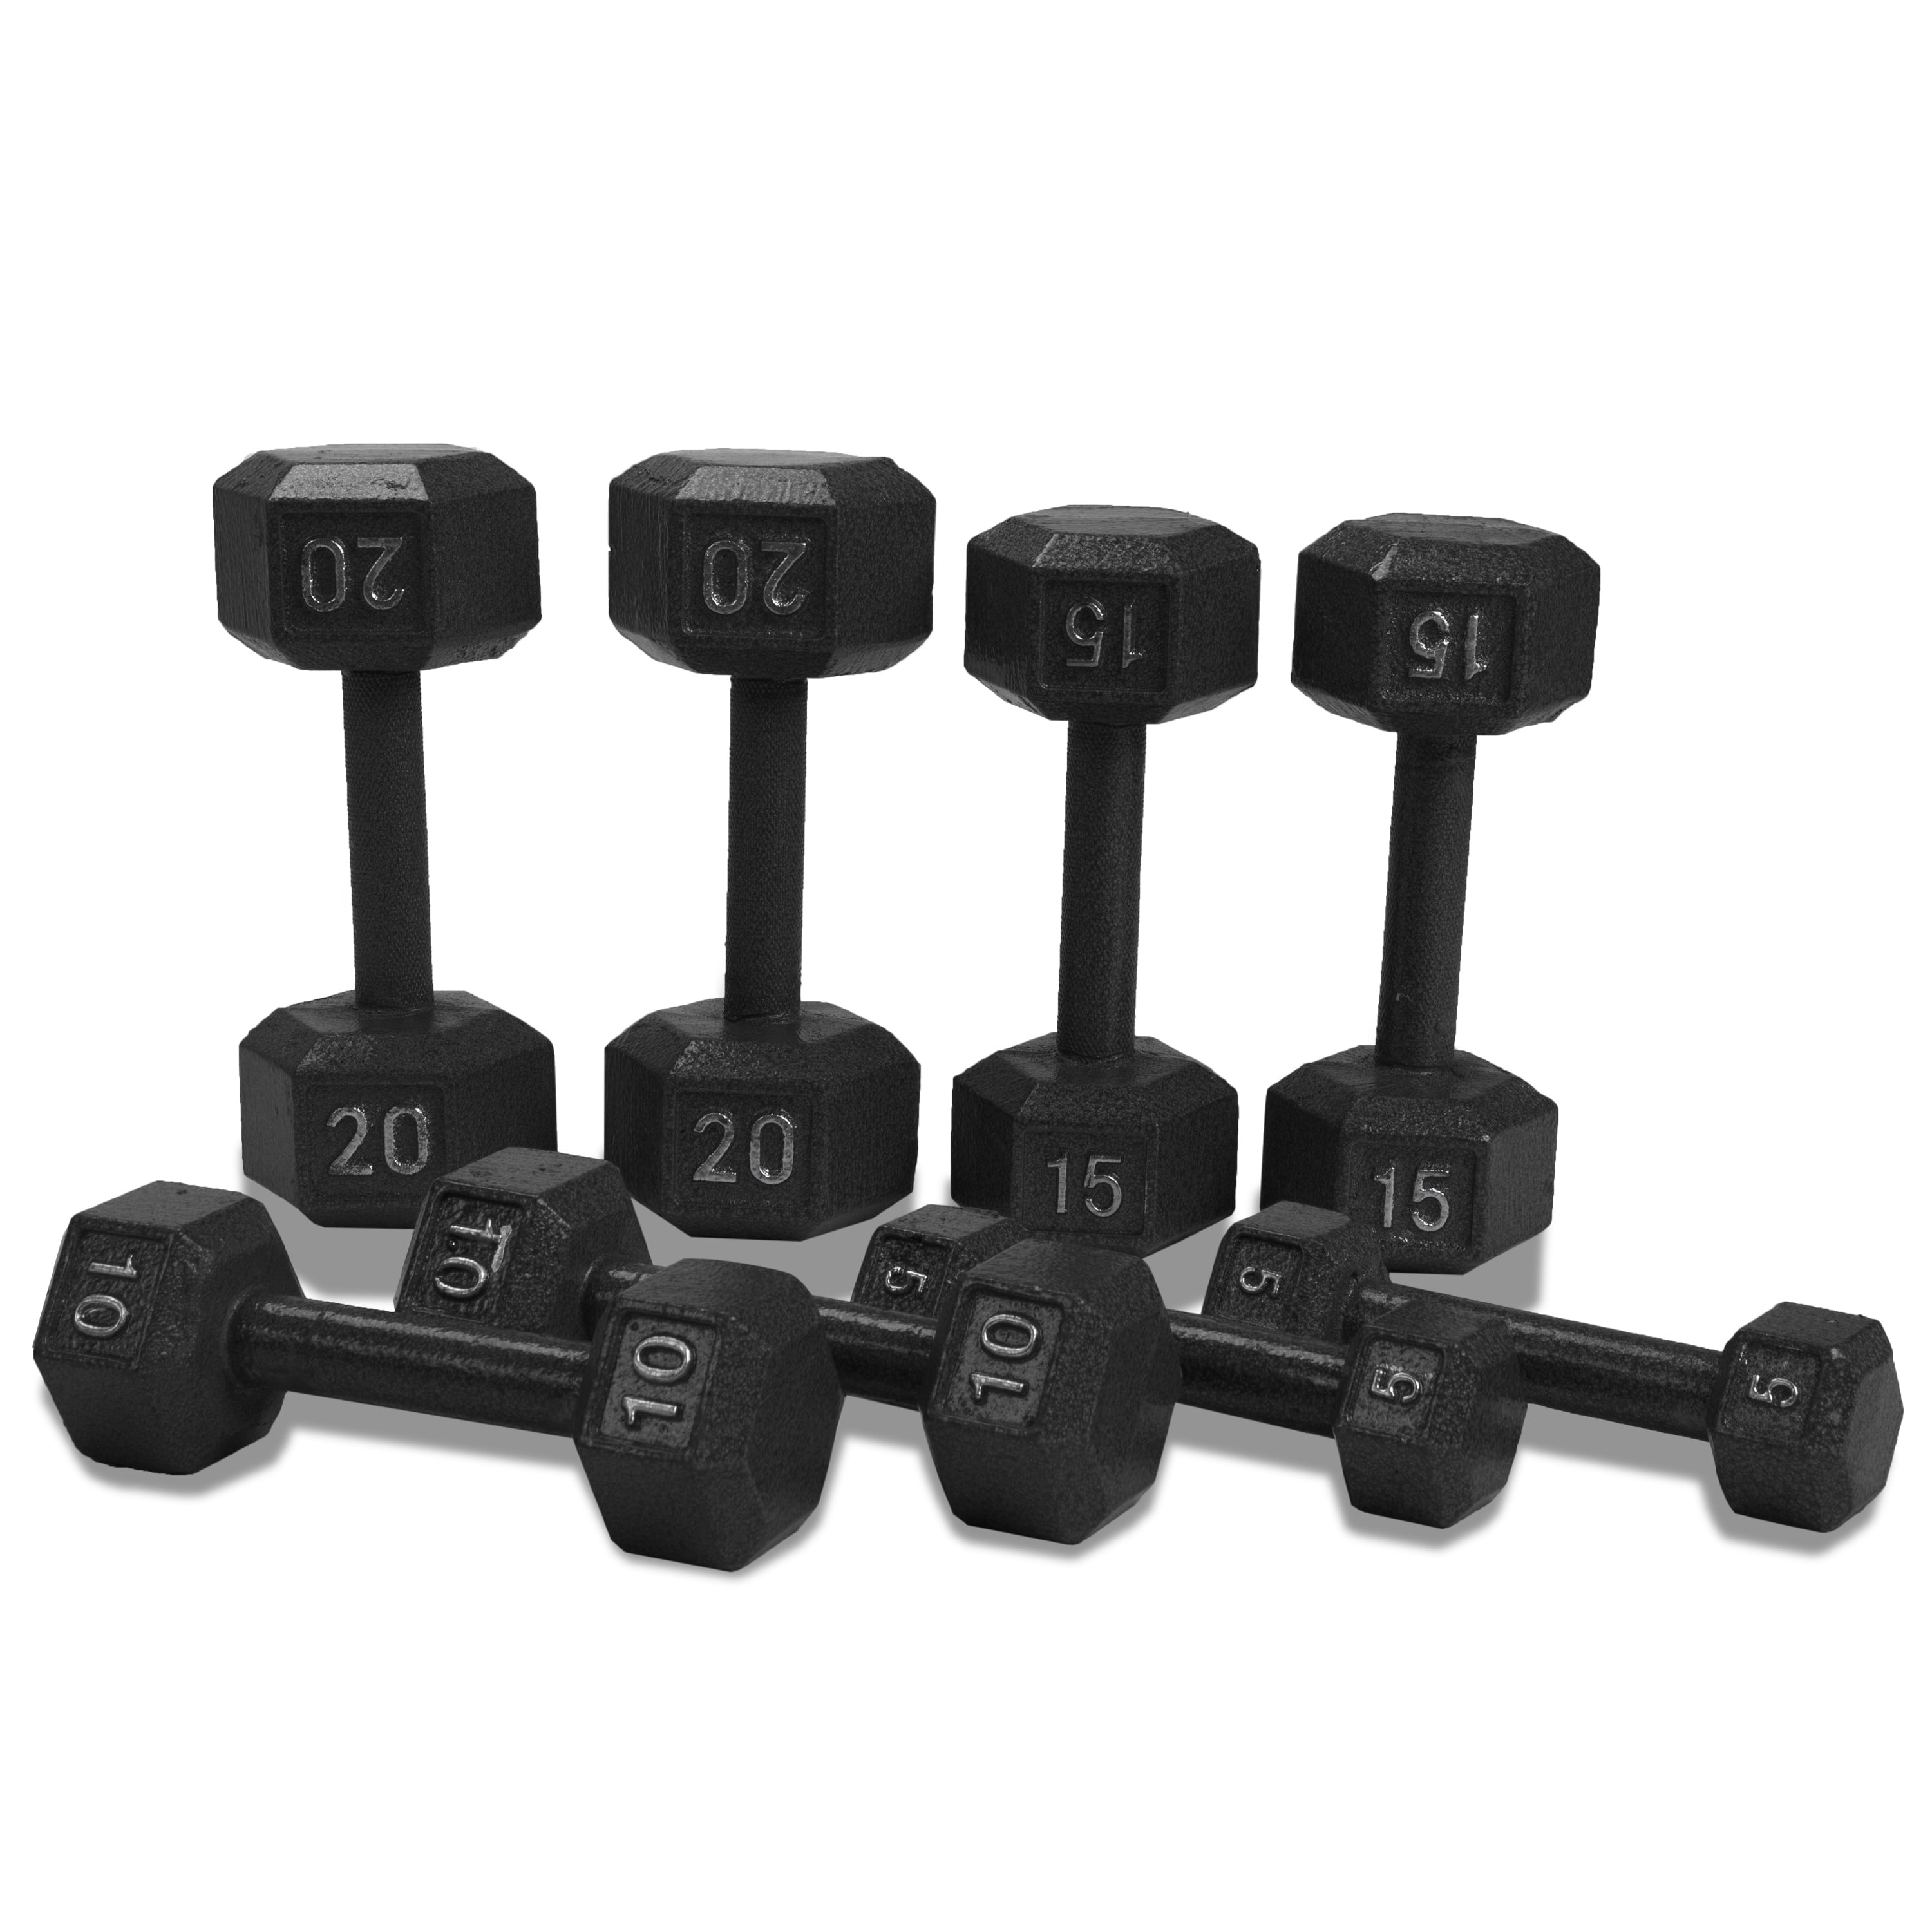 Cap Barbell 100 lb Cast Iron Hex Dumbbell Weight Set with Rack, Black - 733137931